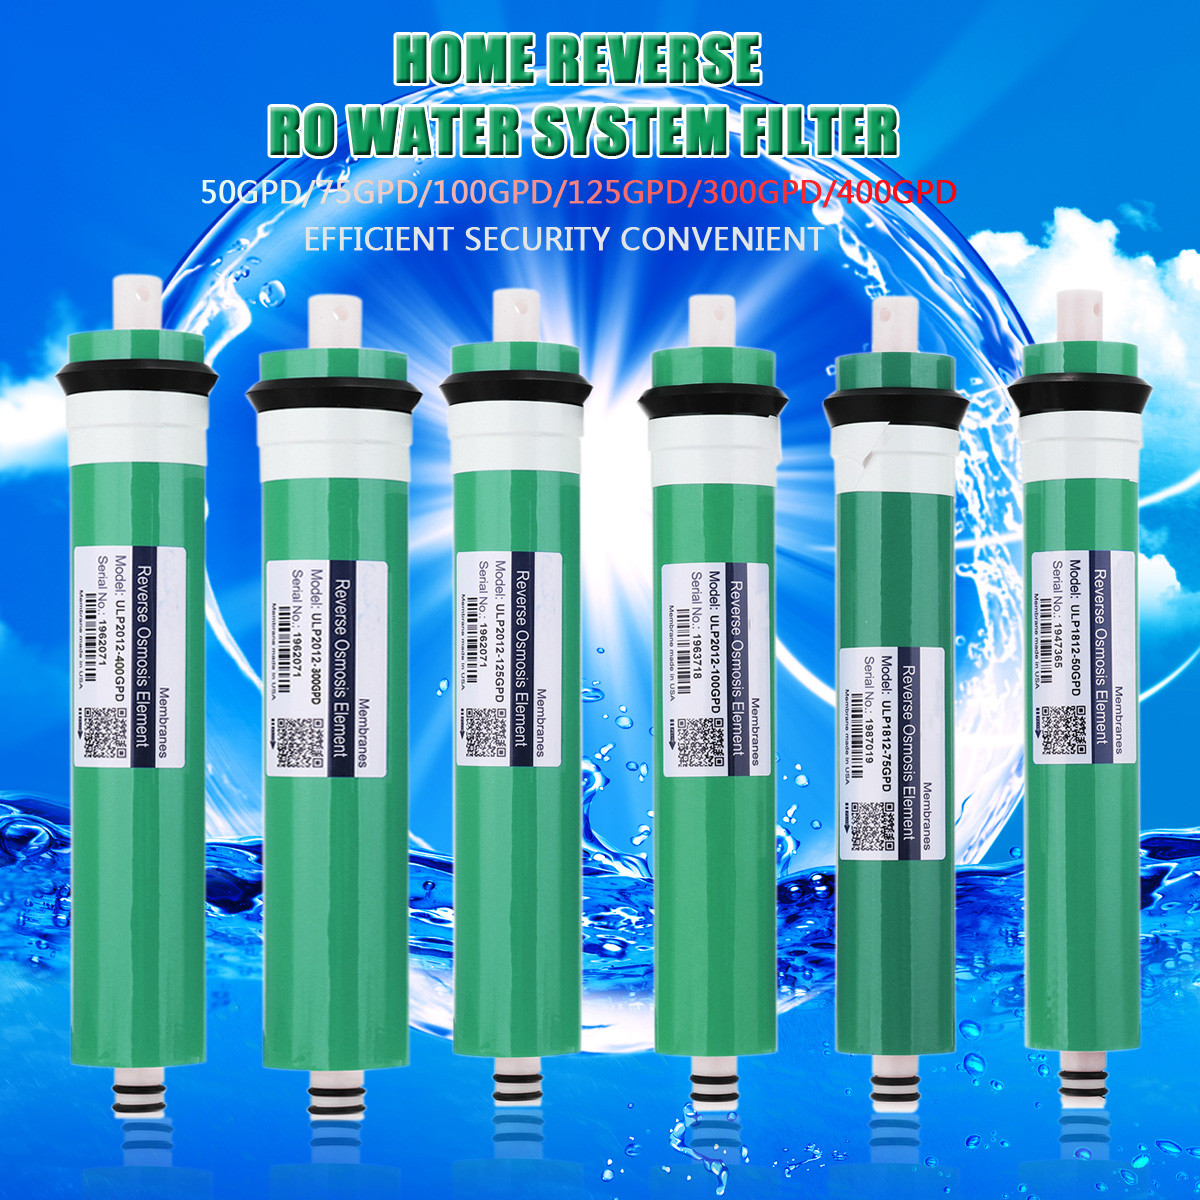 Reverse-Osmosis-Membrane-Replacement-RO-Water-Purifier-Filter-1541907-1